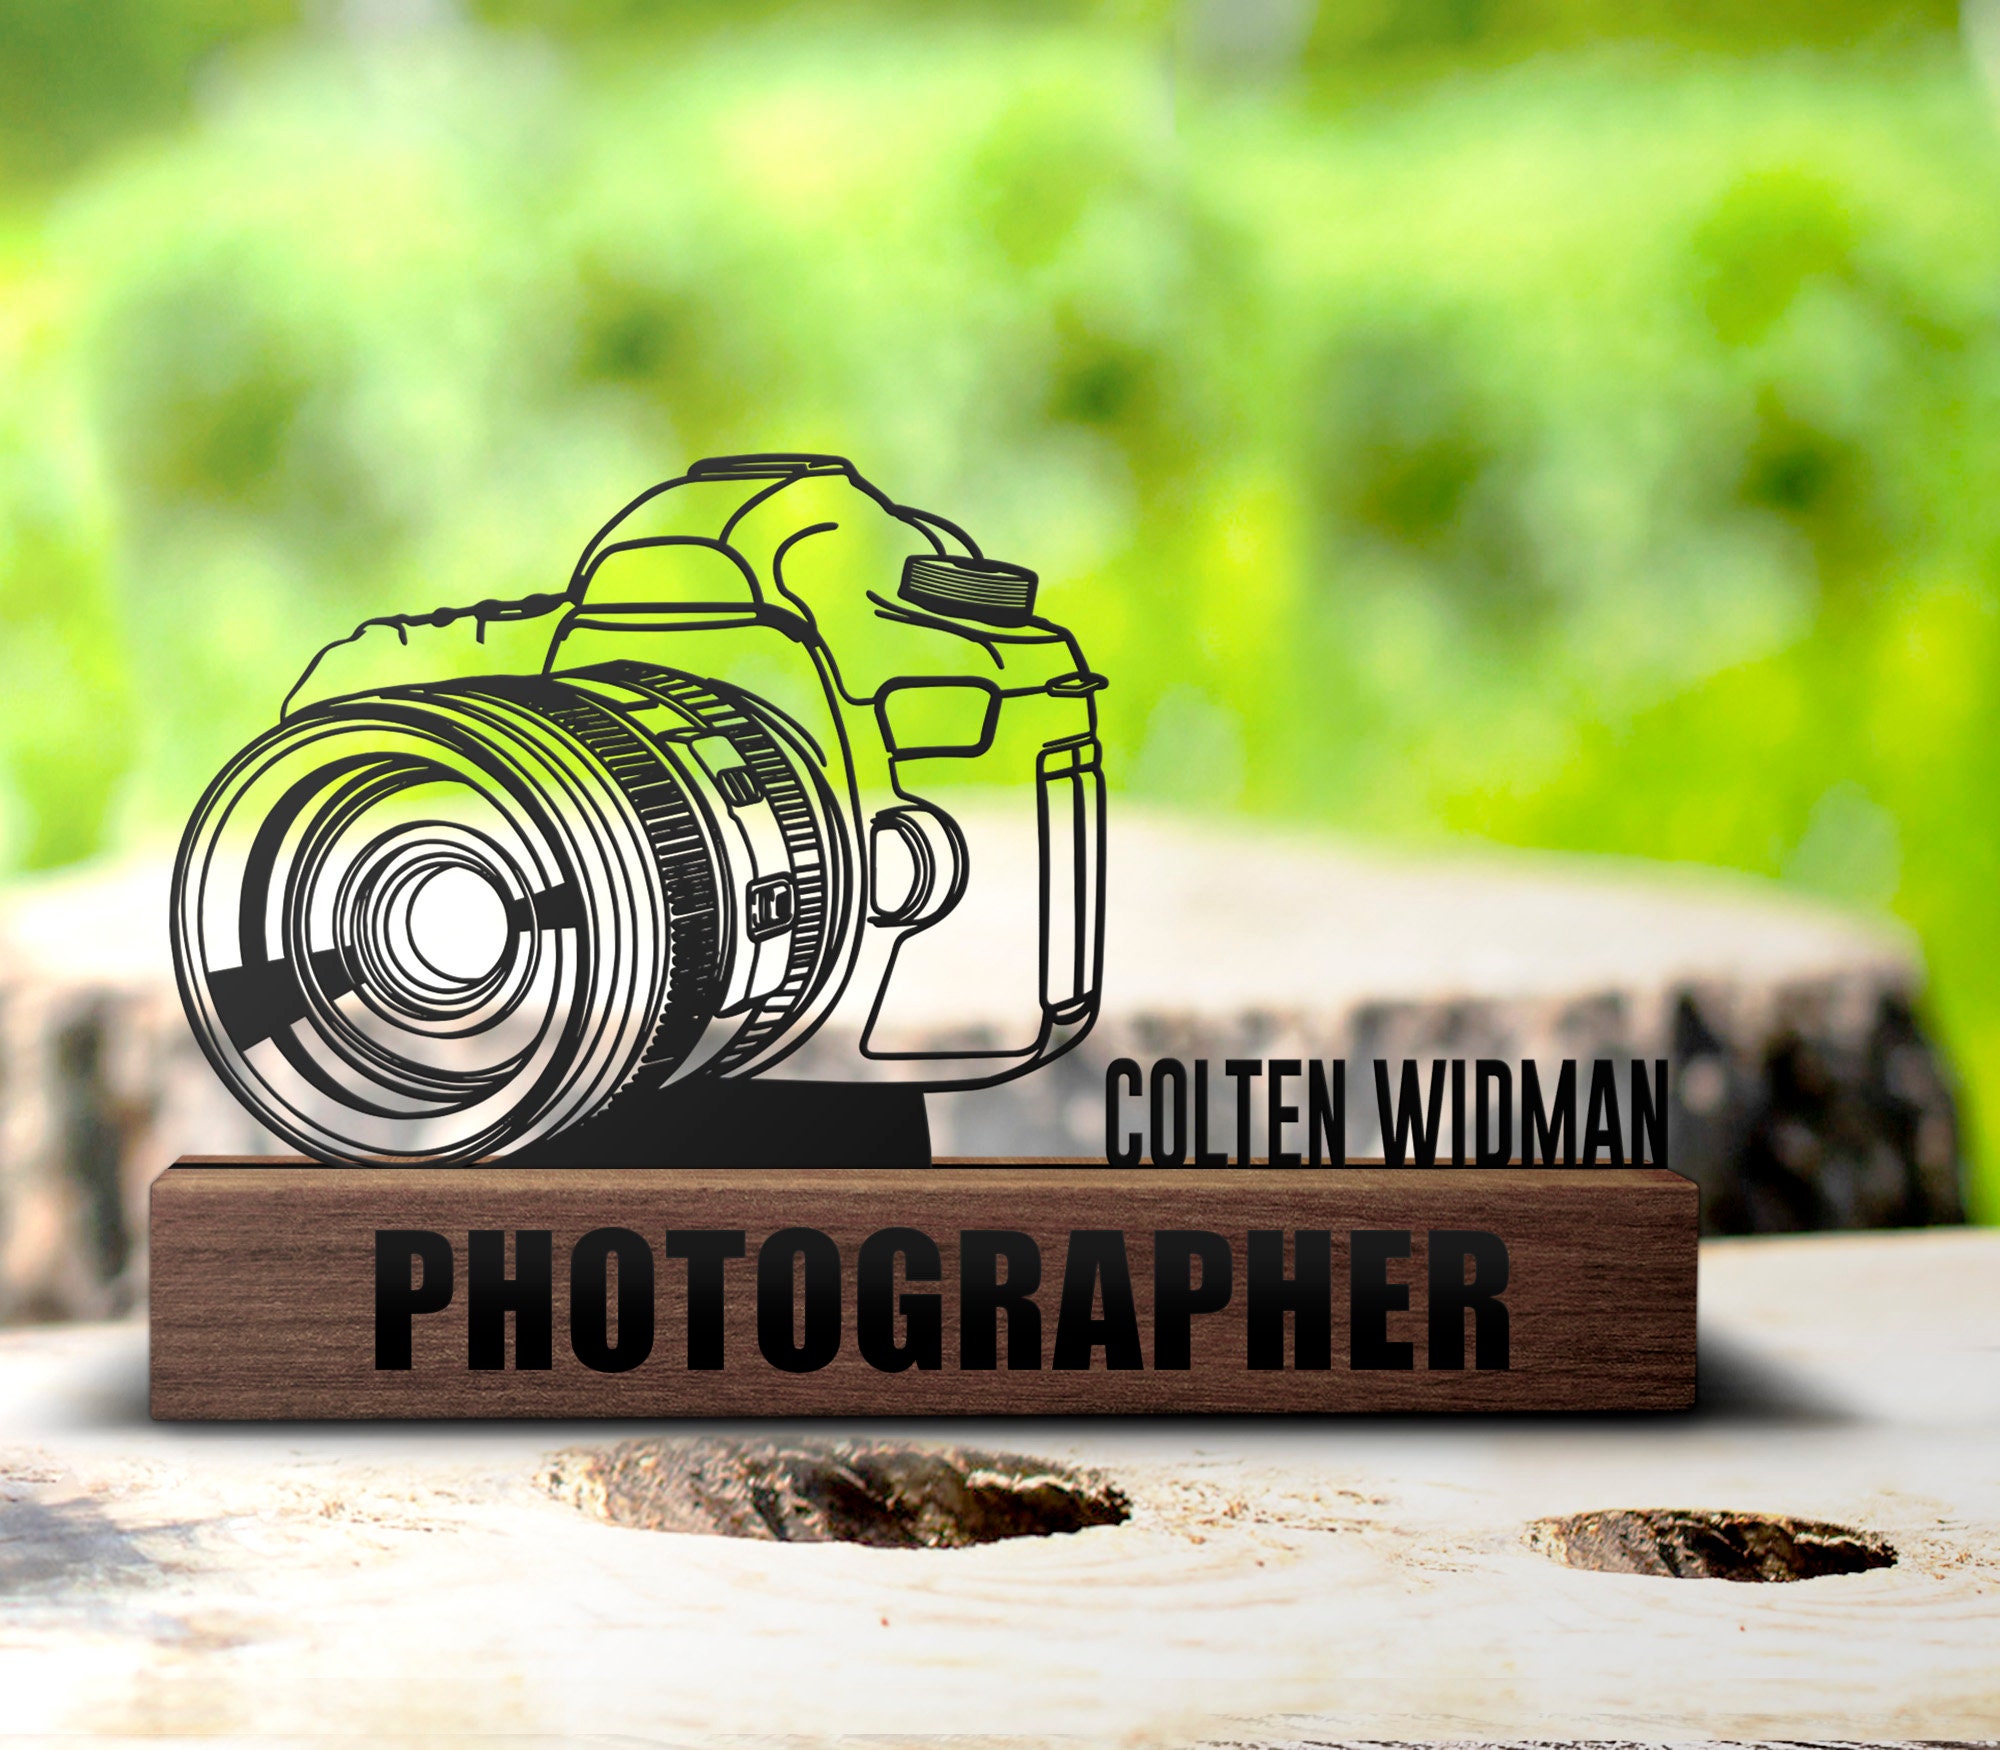 Photographer at the desk, office gadgets and object lens Stock Photo by  halfpoint